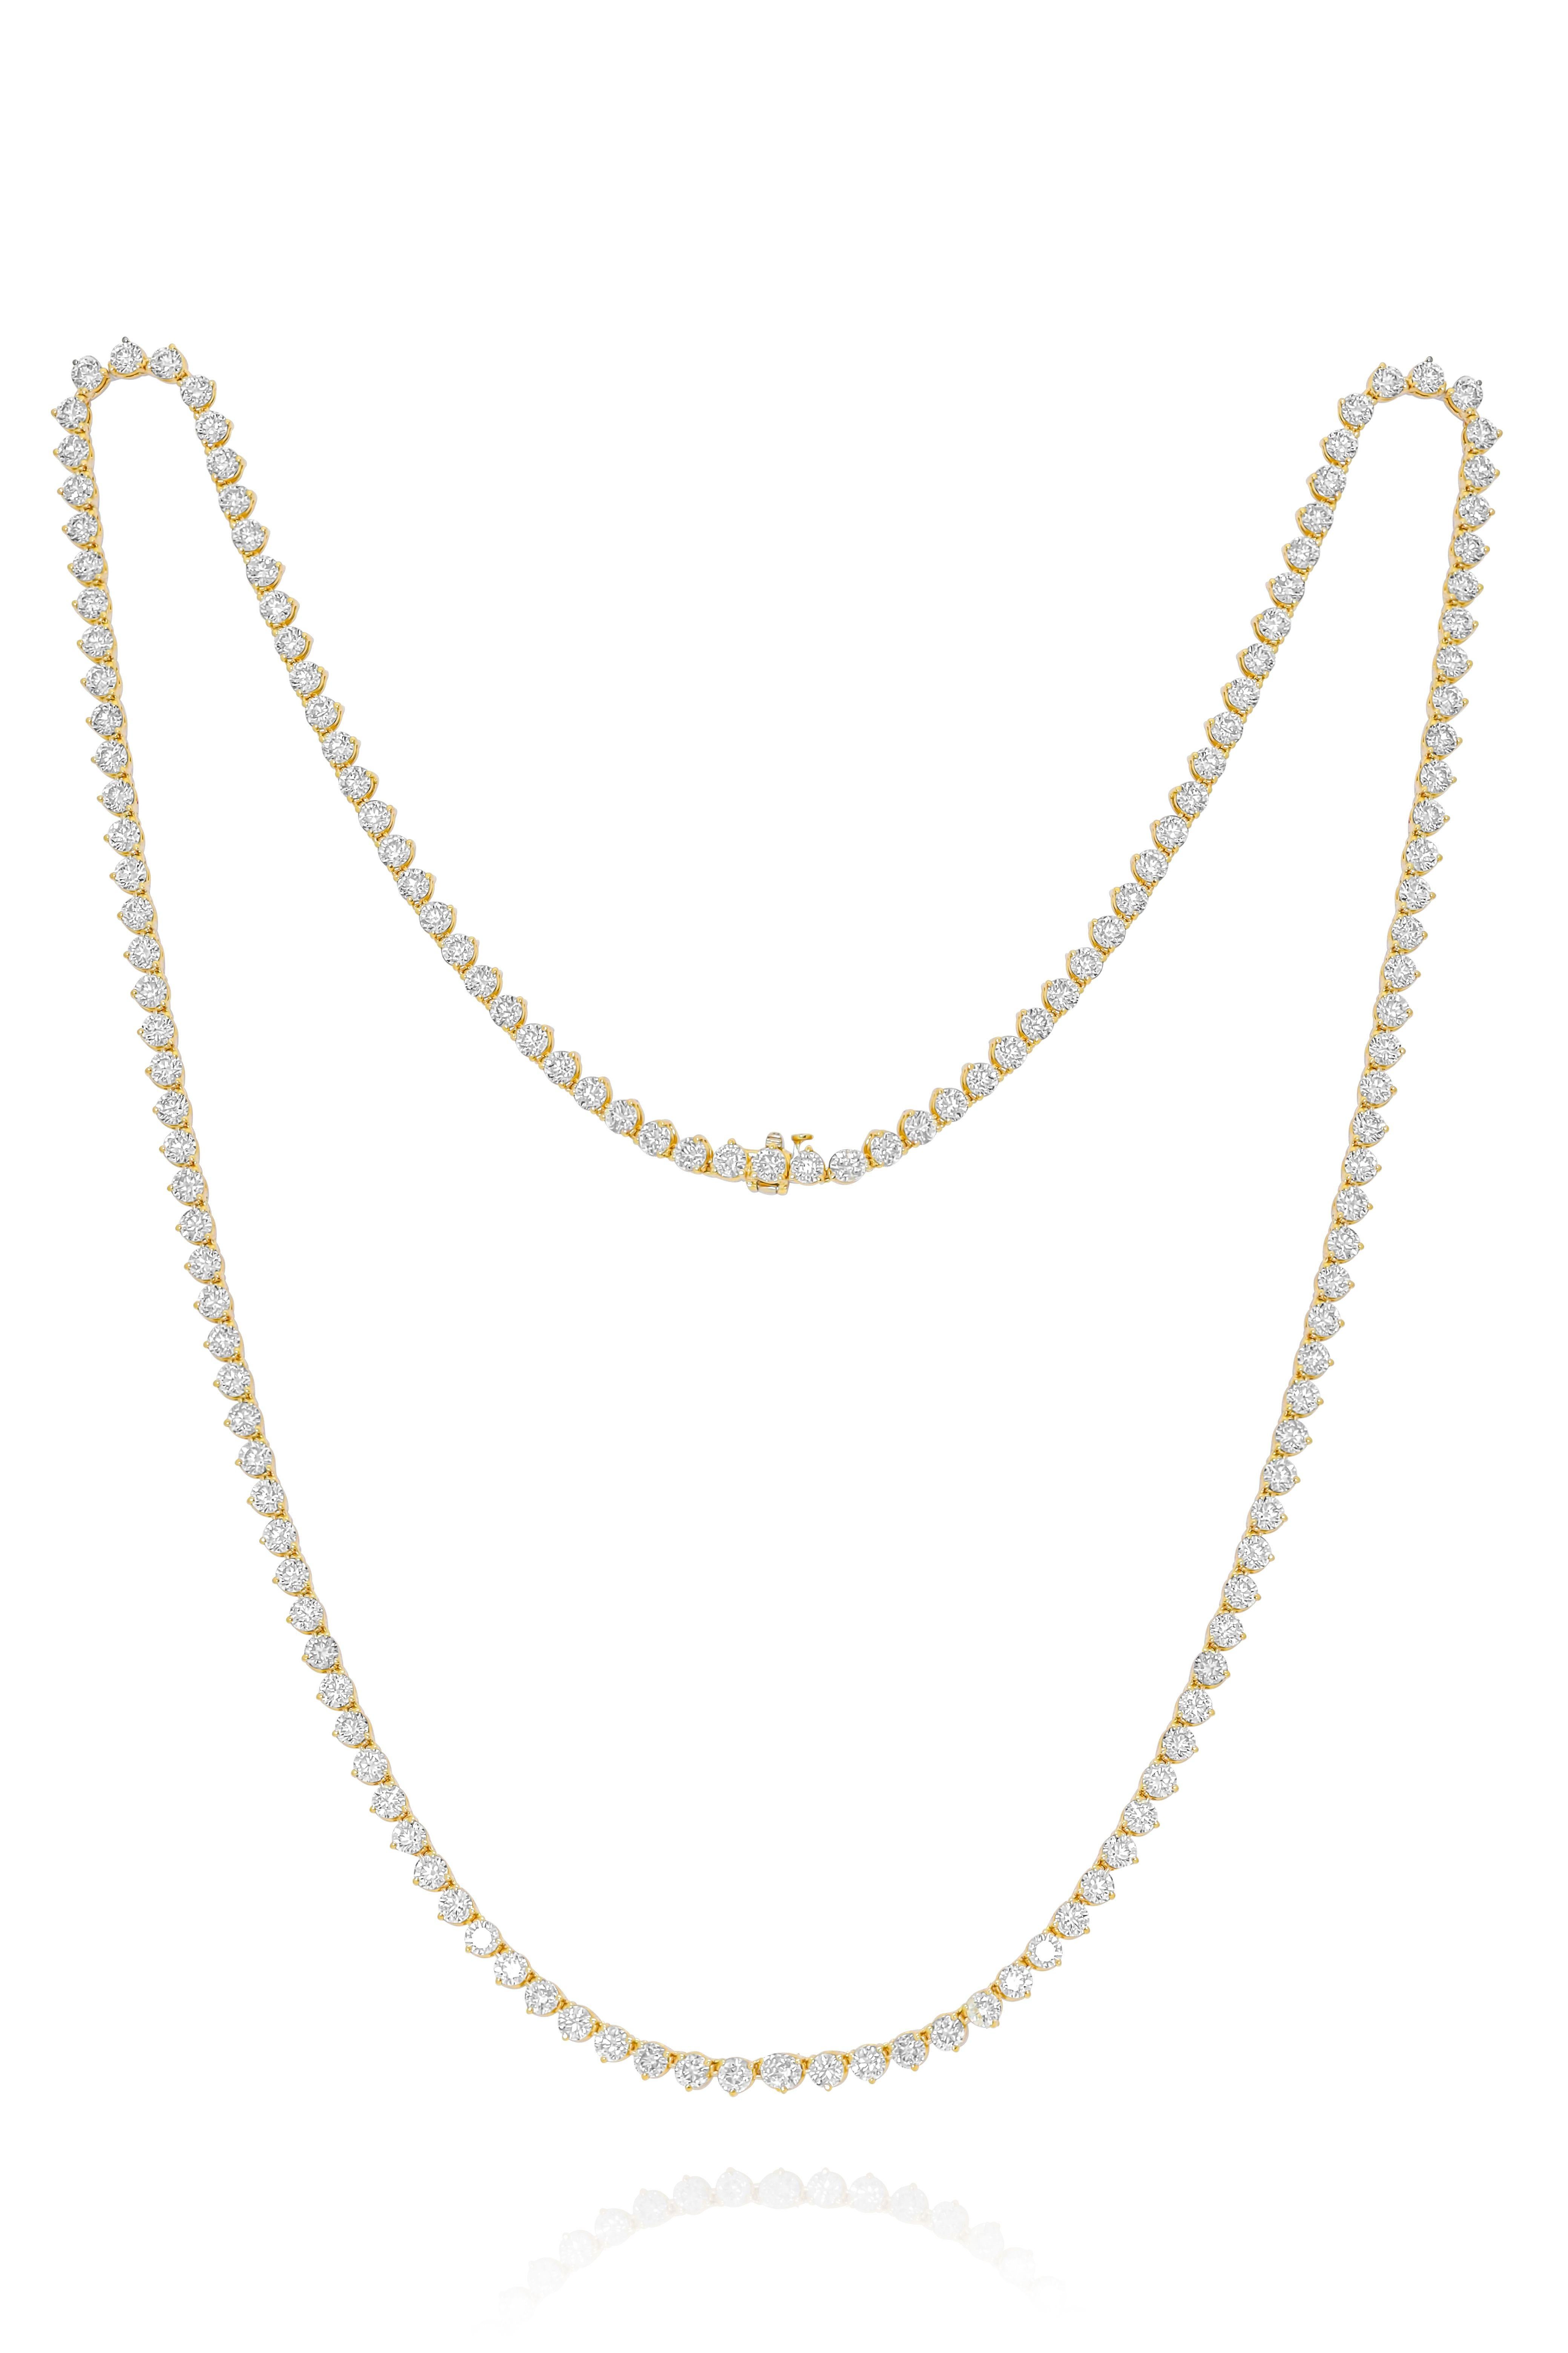 Round Cut Diana M. 48.65 Ct Long Diamond Tennis Necklace For Sale